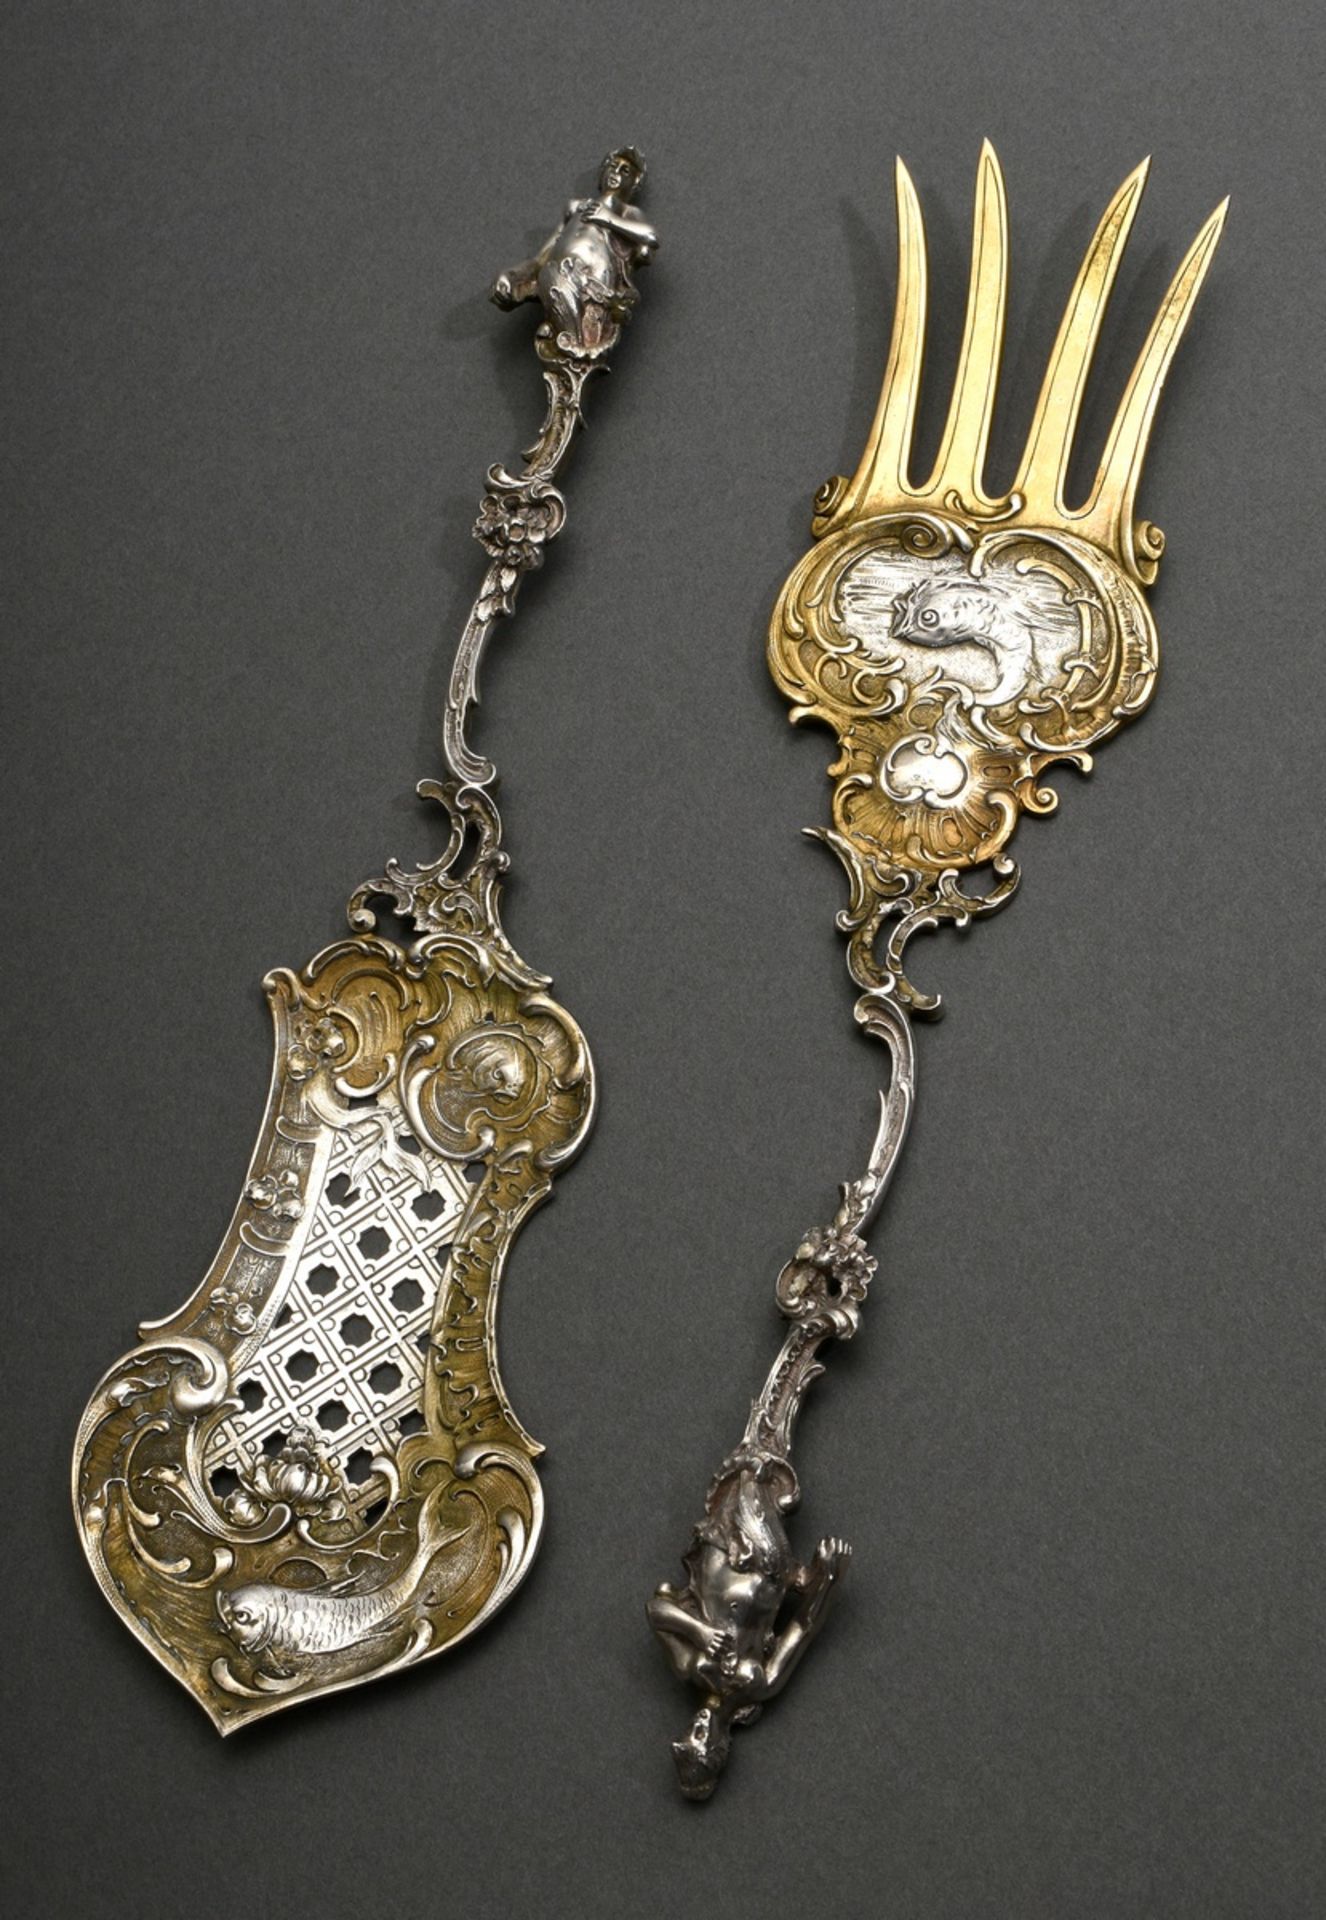 2 Pieces opulent Neo-Rococo fish serving cutlery with sculptural figurative handles and fish relief